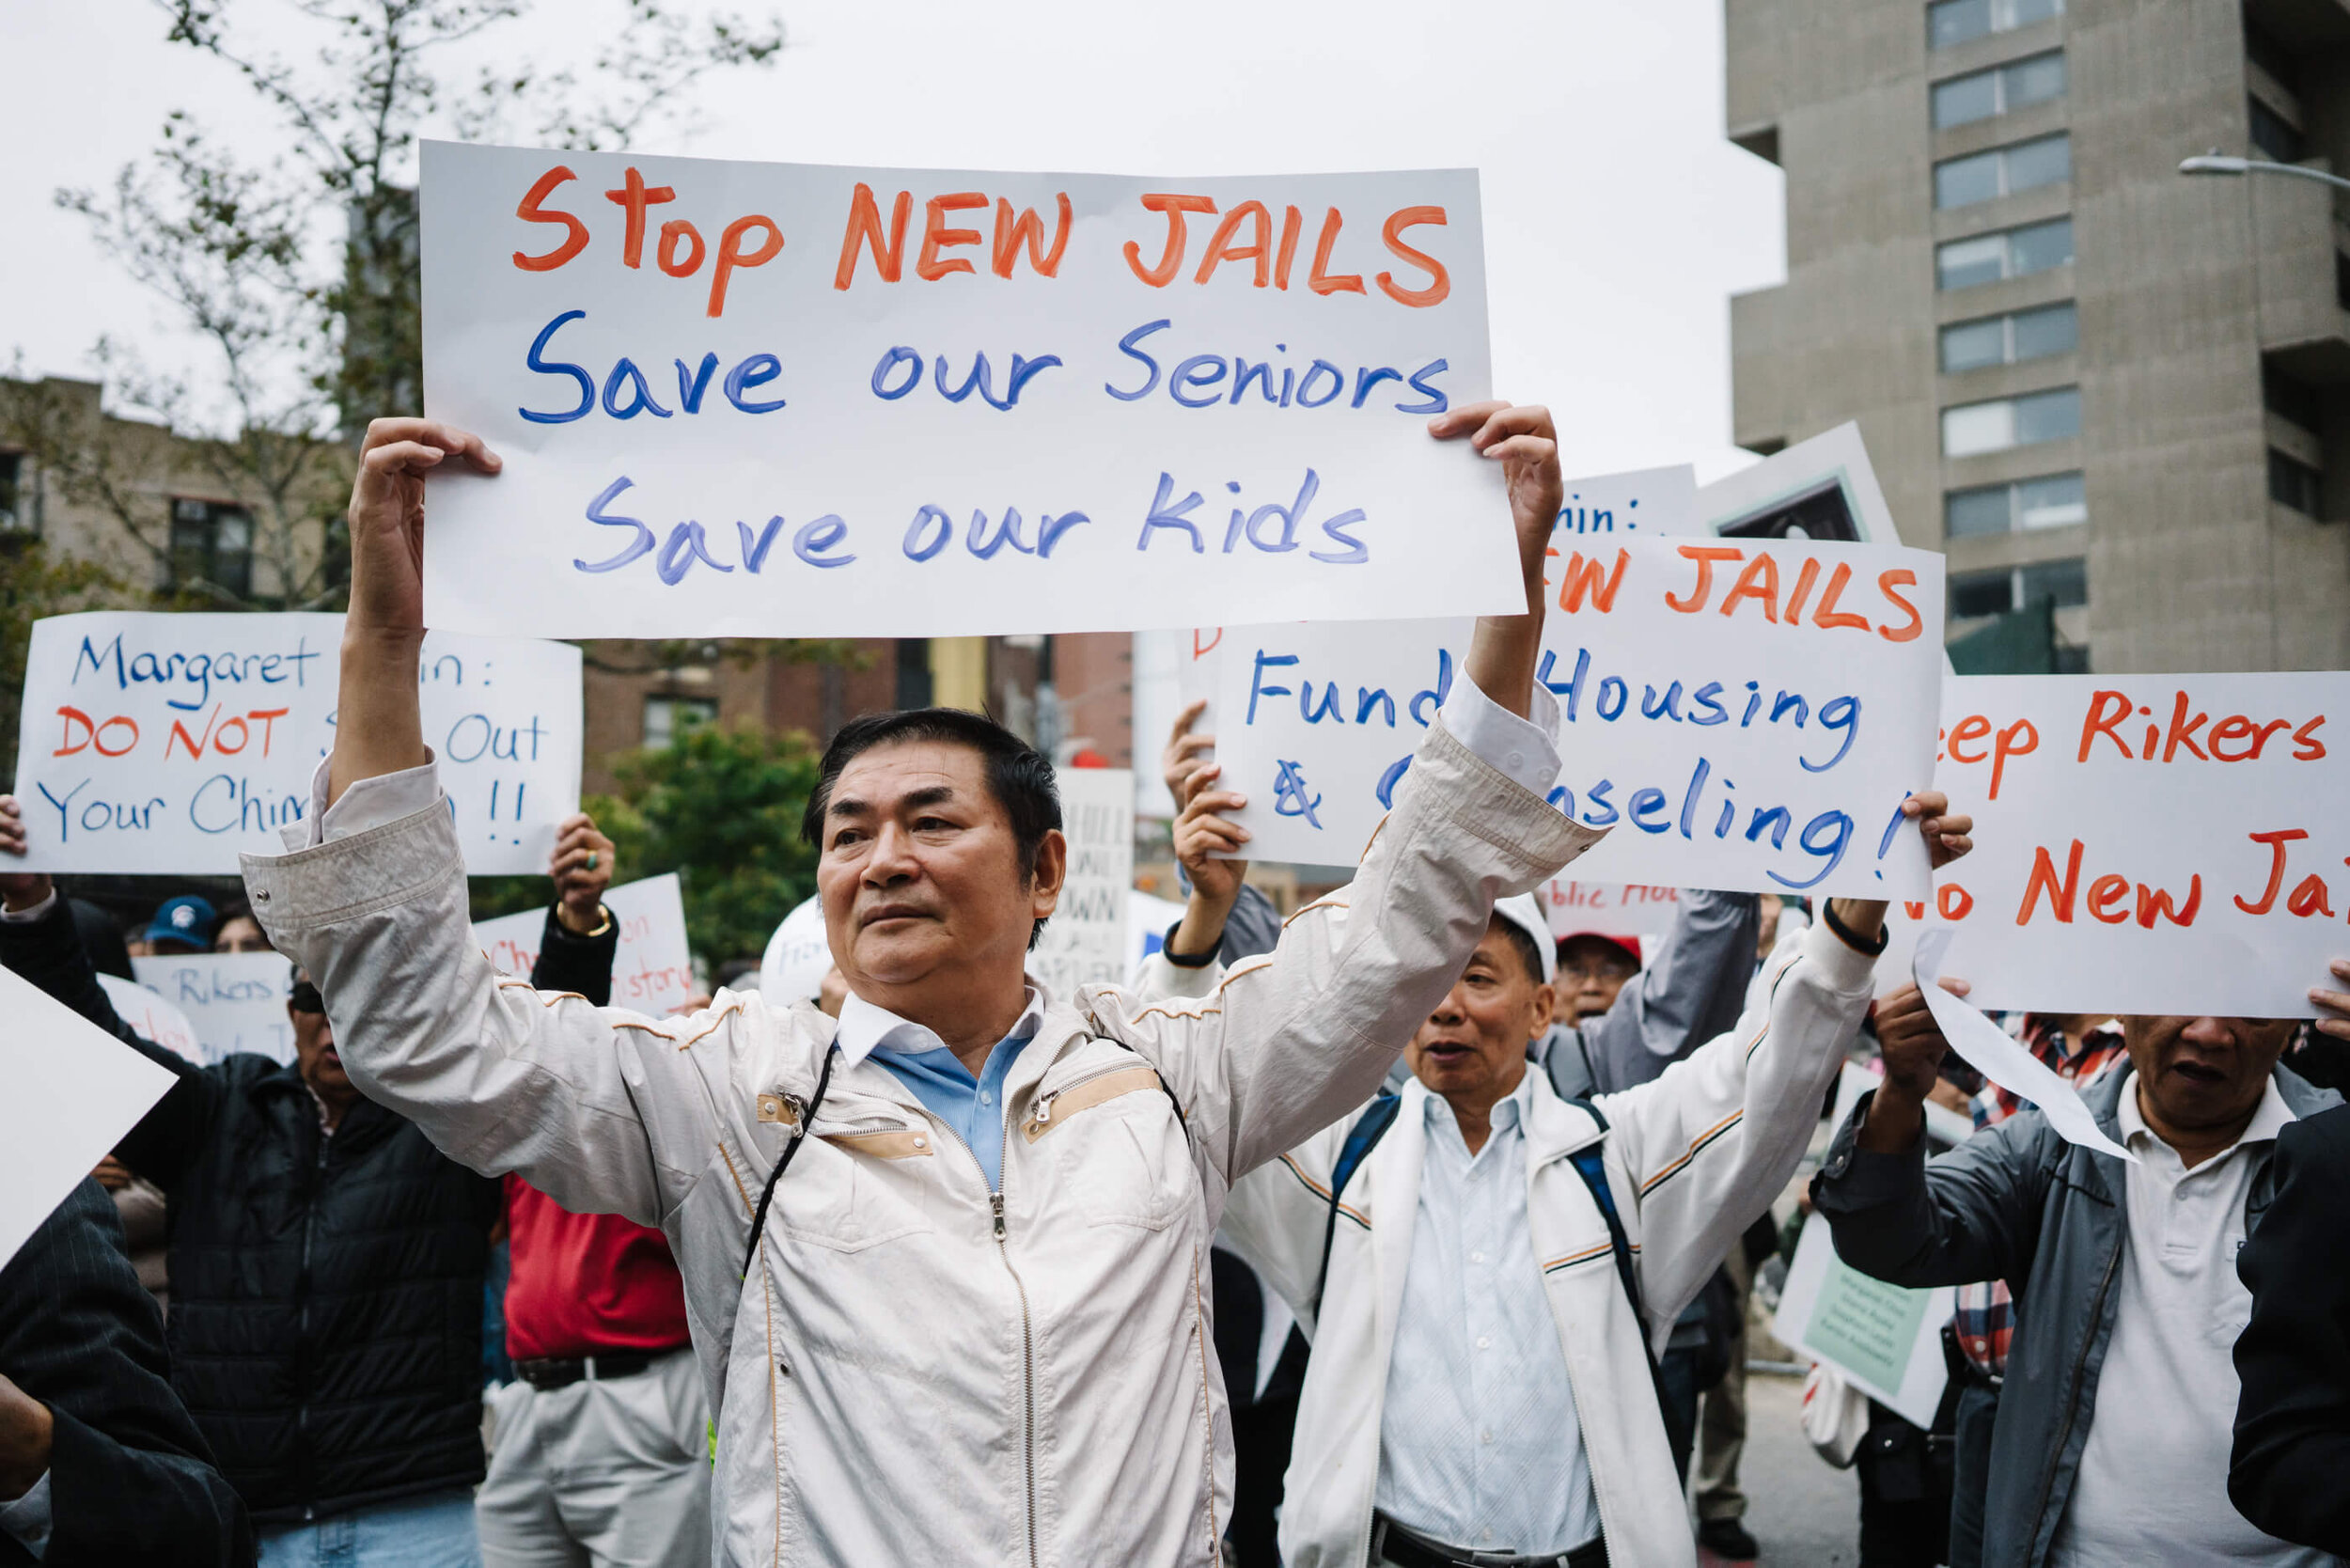 Photo of Manhattan Chinatown residents holding up signs that say: "Stop new jails, save our seniors, save our kids"